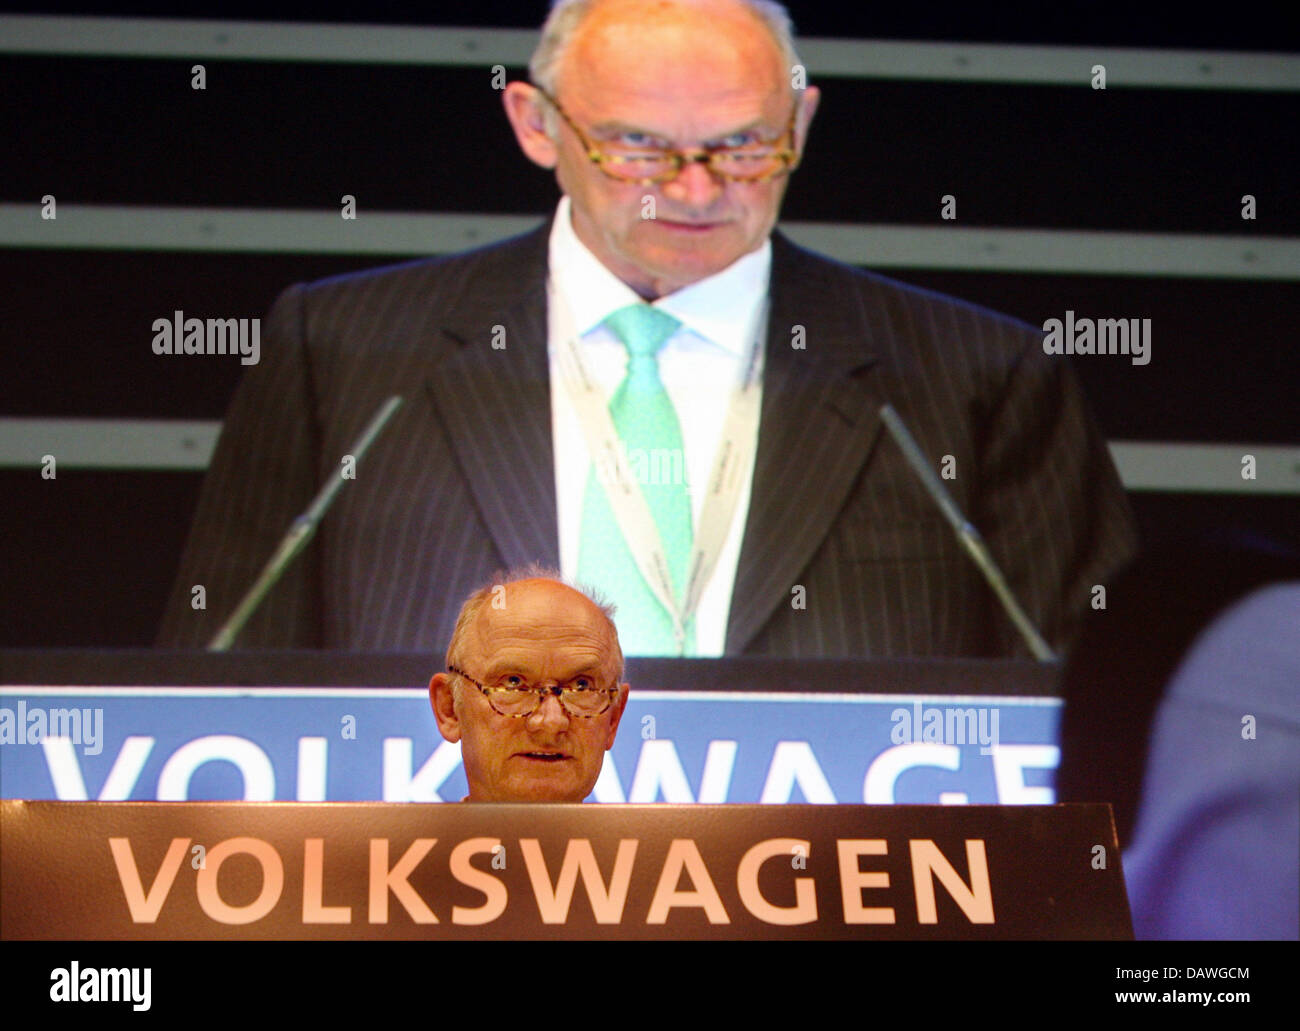 Ferdinand Piech, chairman of the supervisory board of Volkswagen AG, gives a speech at the opening of the VW general meeting in Hamburg, Germany, Thursday 19 April 2007. The profit of automobile manufacturer VW more than doubled during the first quarter of 2007 as compared to the same period  in 2006. Assets amount to 740 million euros. Piech shall return to the supervisory board a Stock Photo